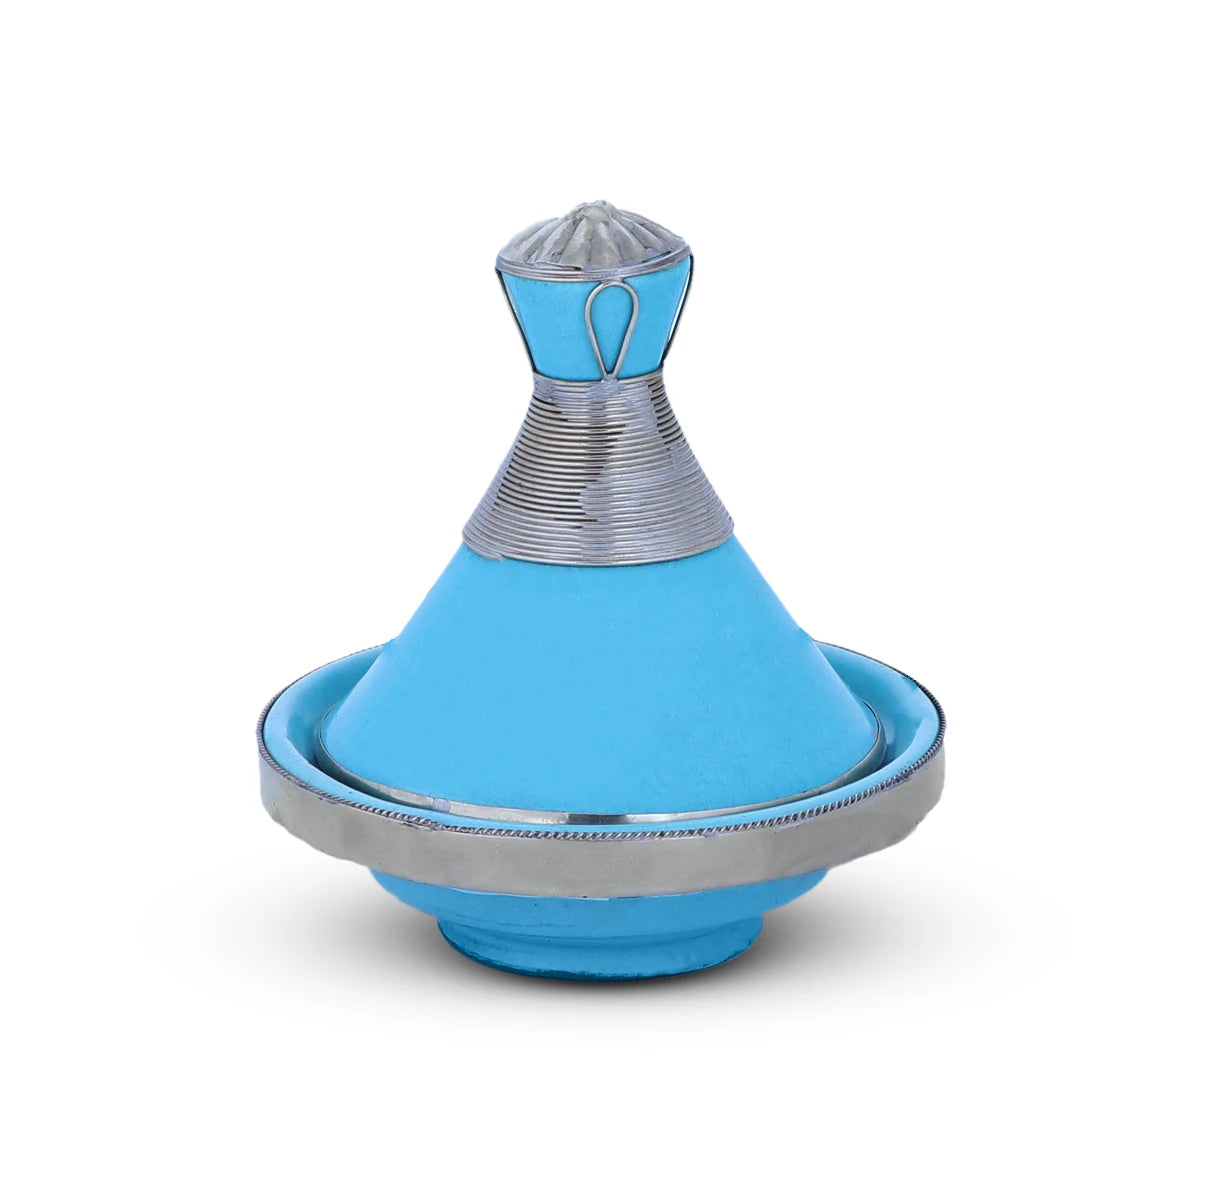 Authentic Handmade Cyan Blue Moroccan Tagine Ornamented with Brass Railings